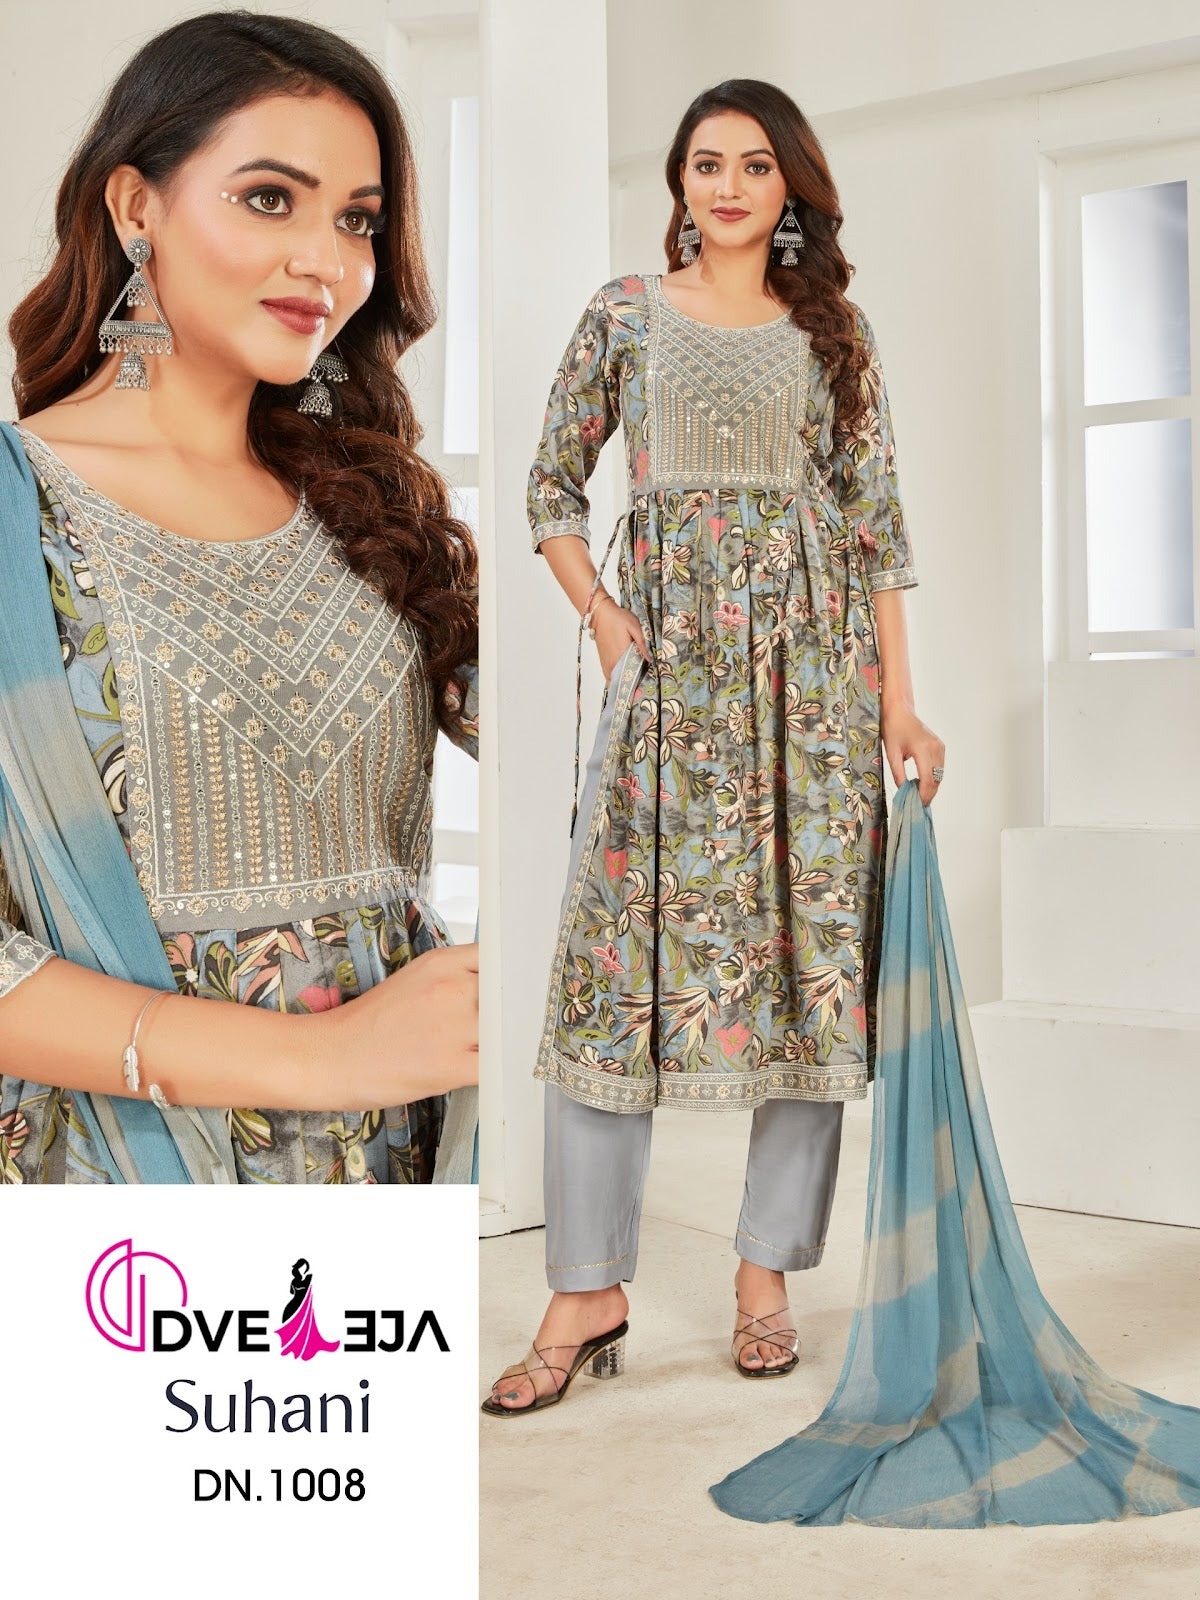 Suhaani Dveeja Fashion Rayon Readymade Pant Style Suits